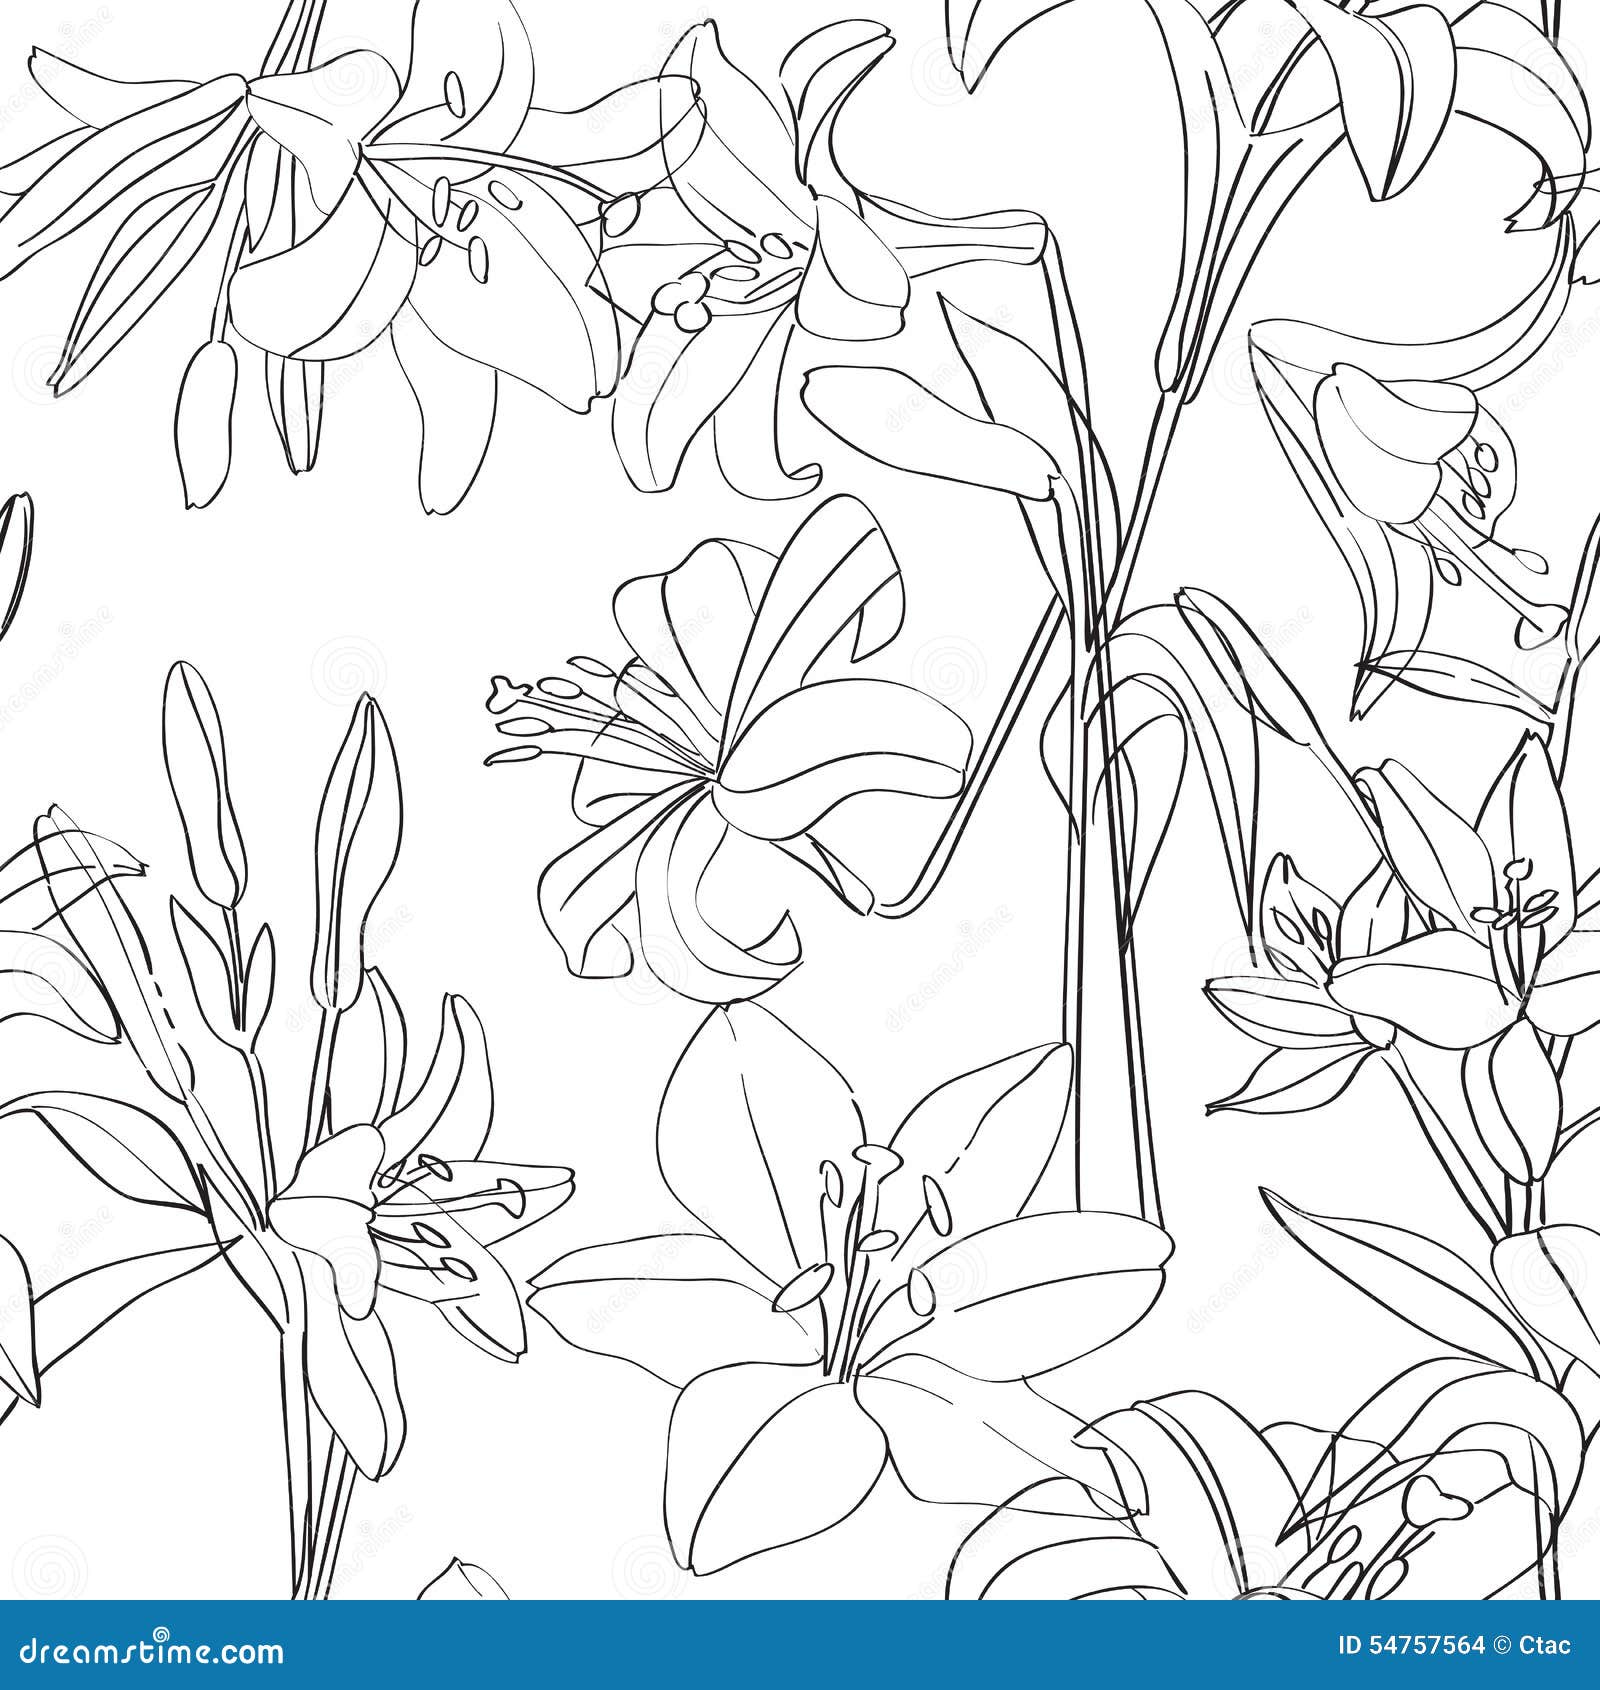 lilies pattern superposed